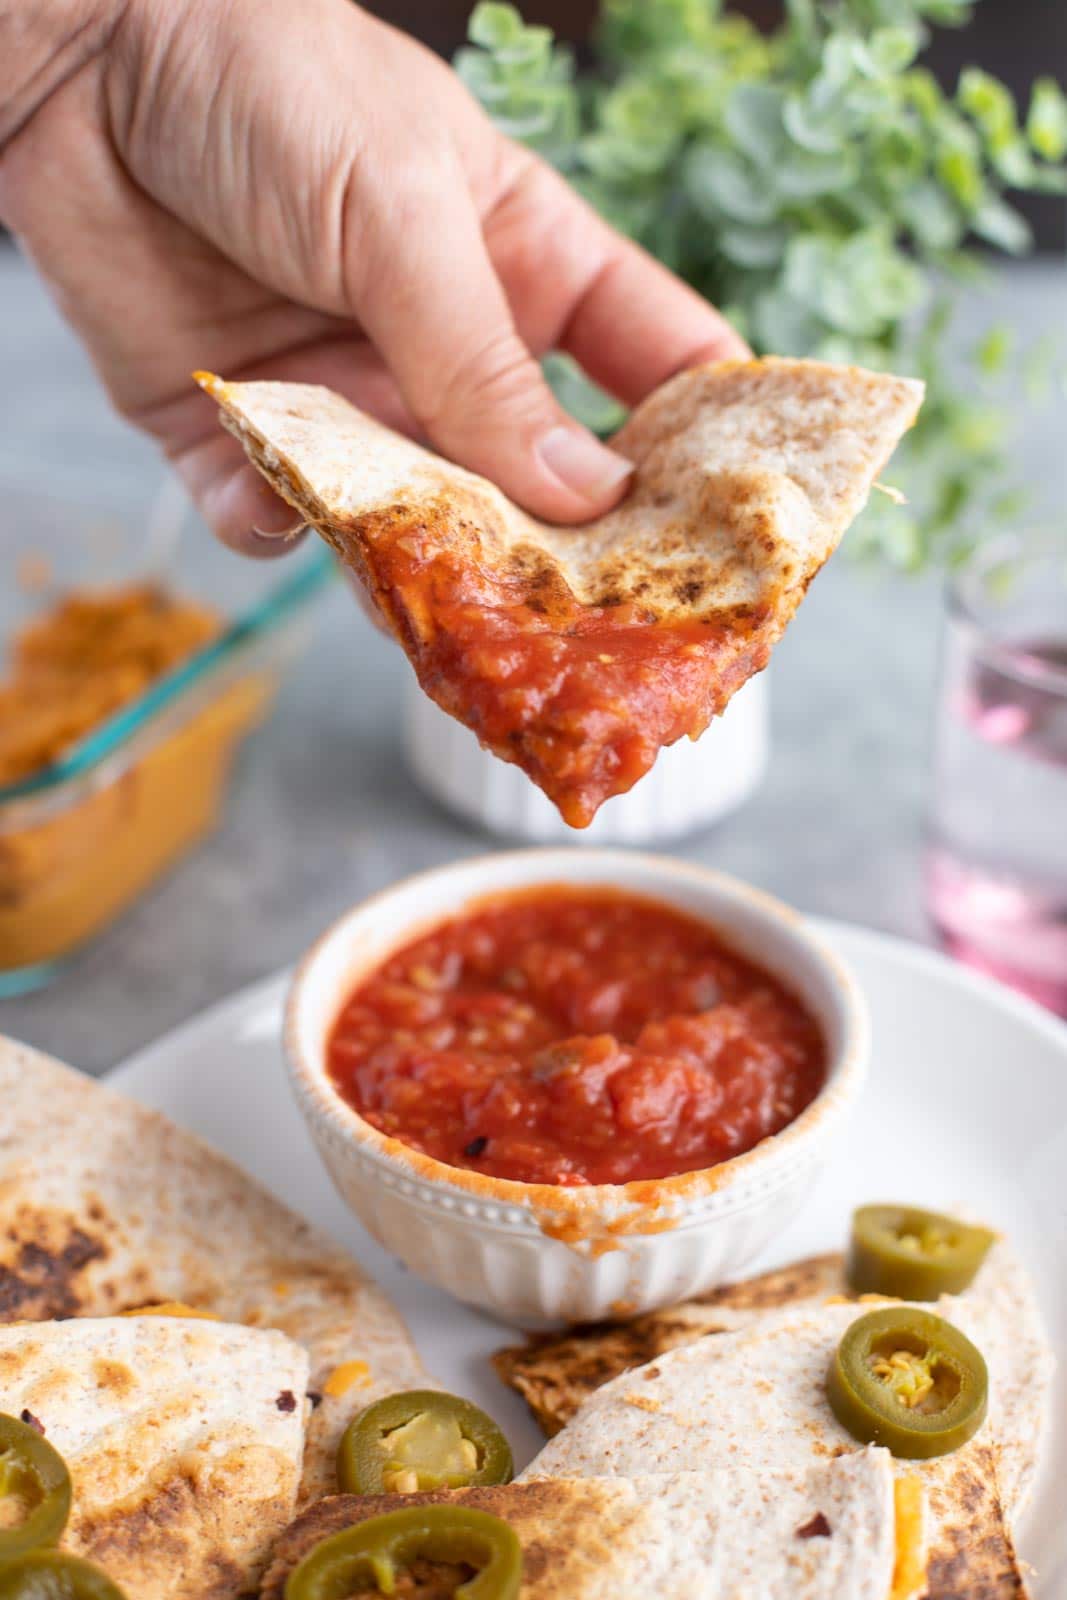 A hand dipping a quesadilla slice into a bowl of salsa.